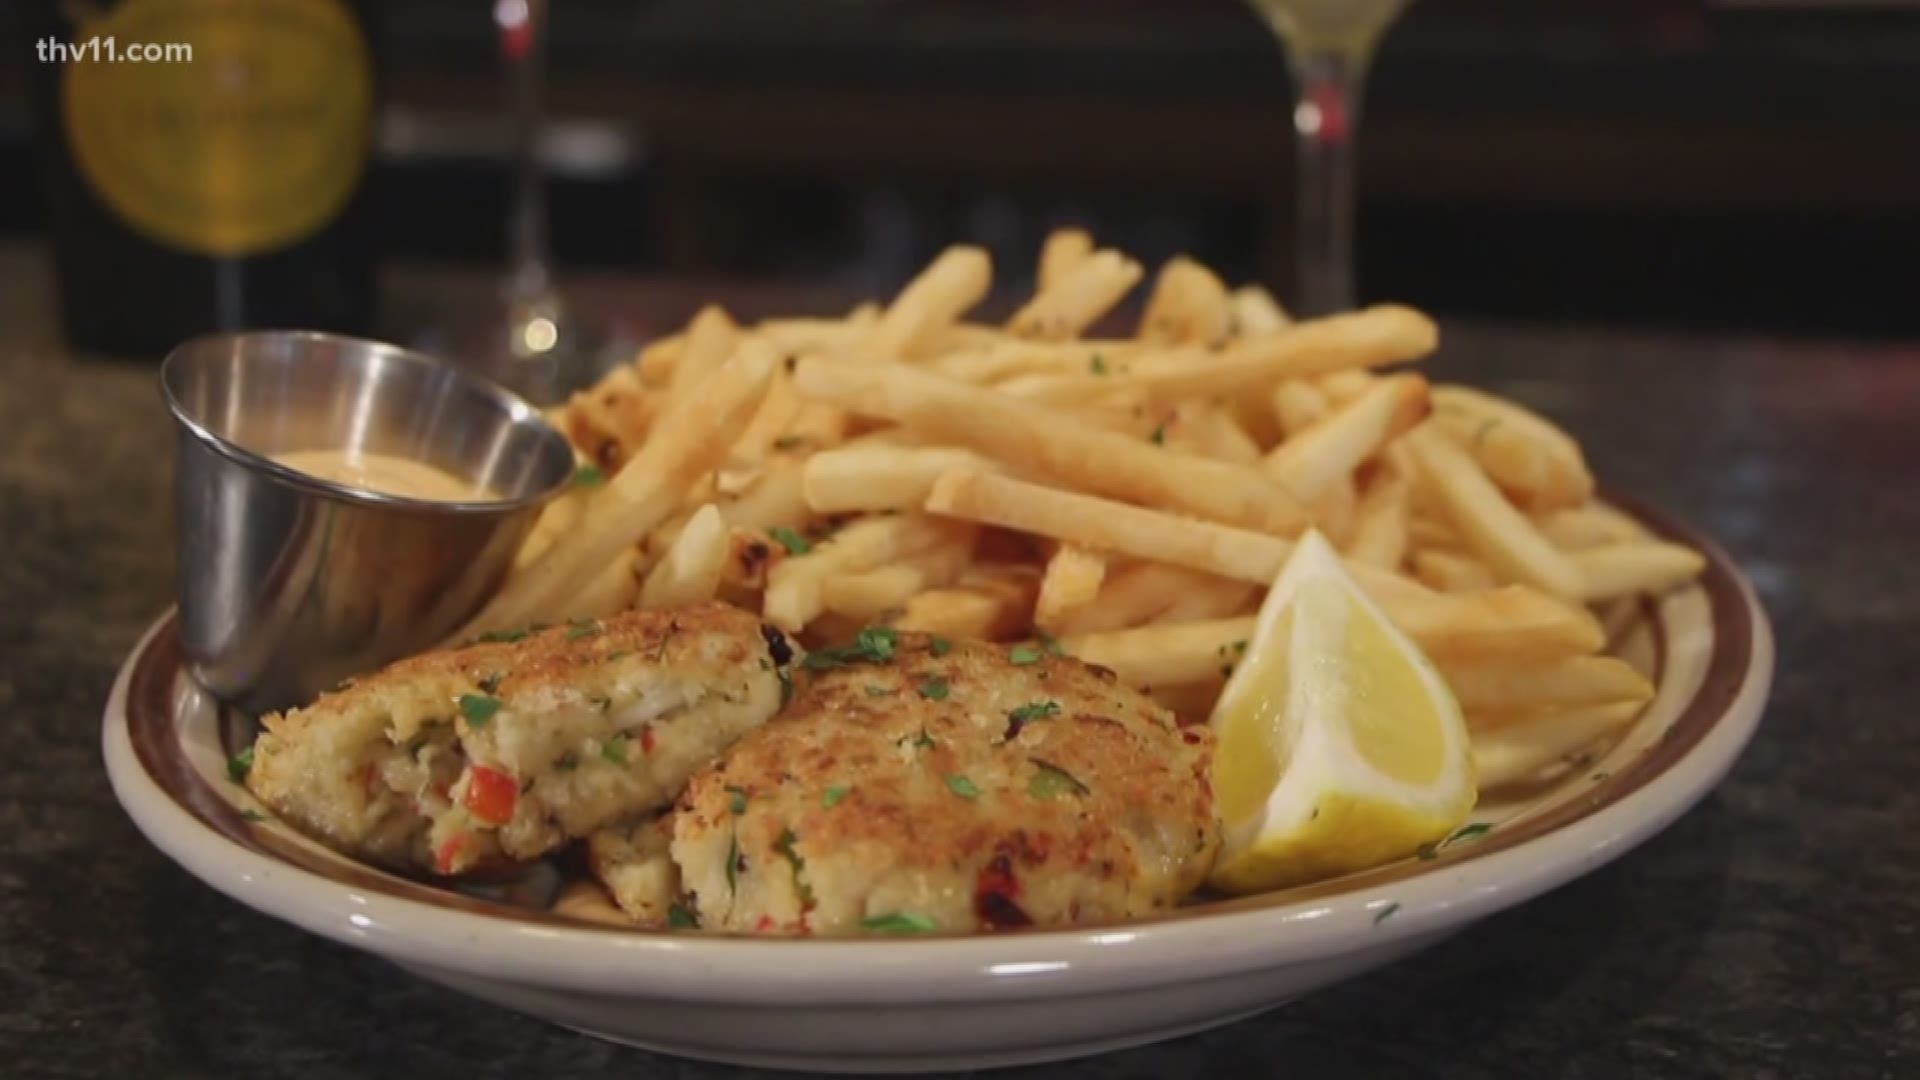 Atlas Bar in Soma has more than just your typical bar food. They have a unique collection of international dishes -- including crab cakes served with sriracha aioli.